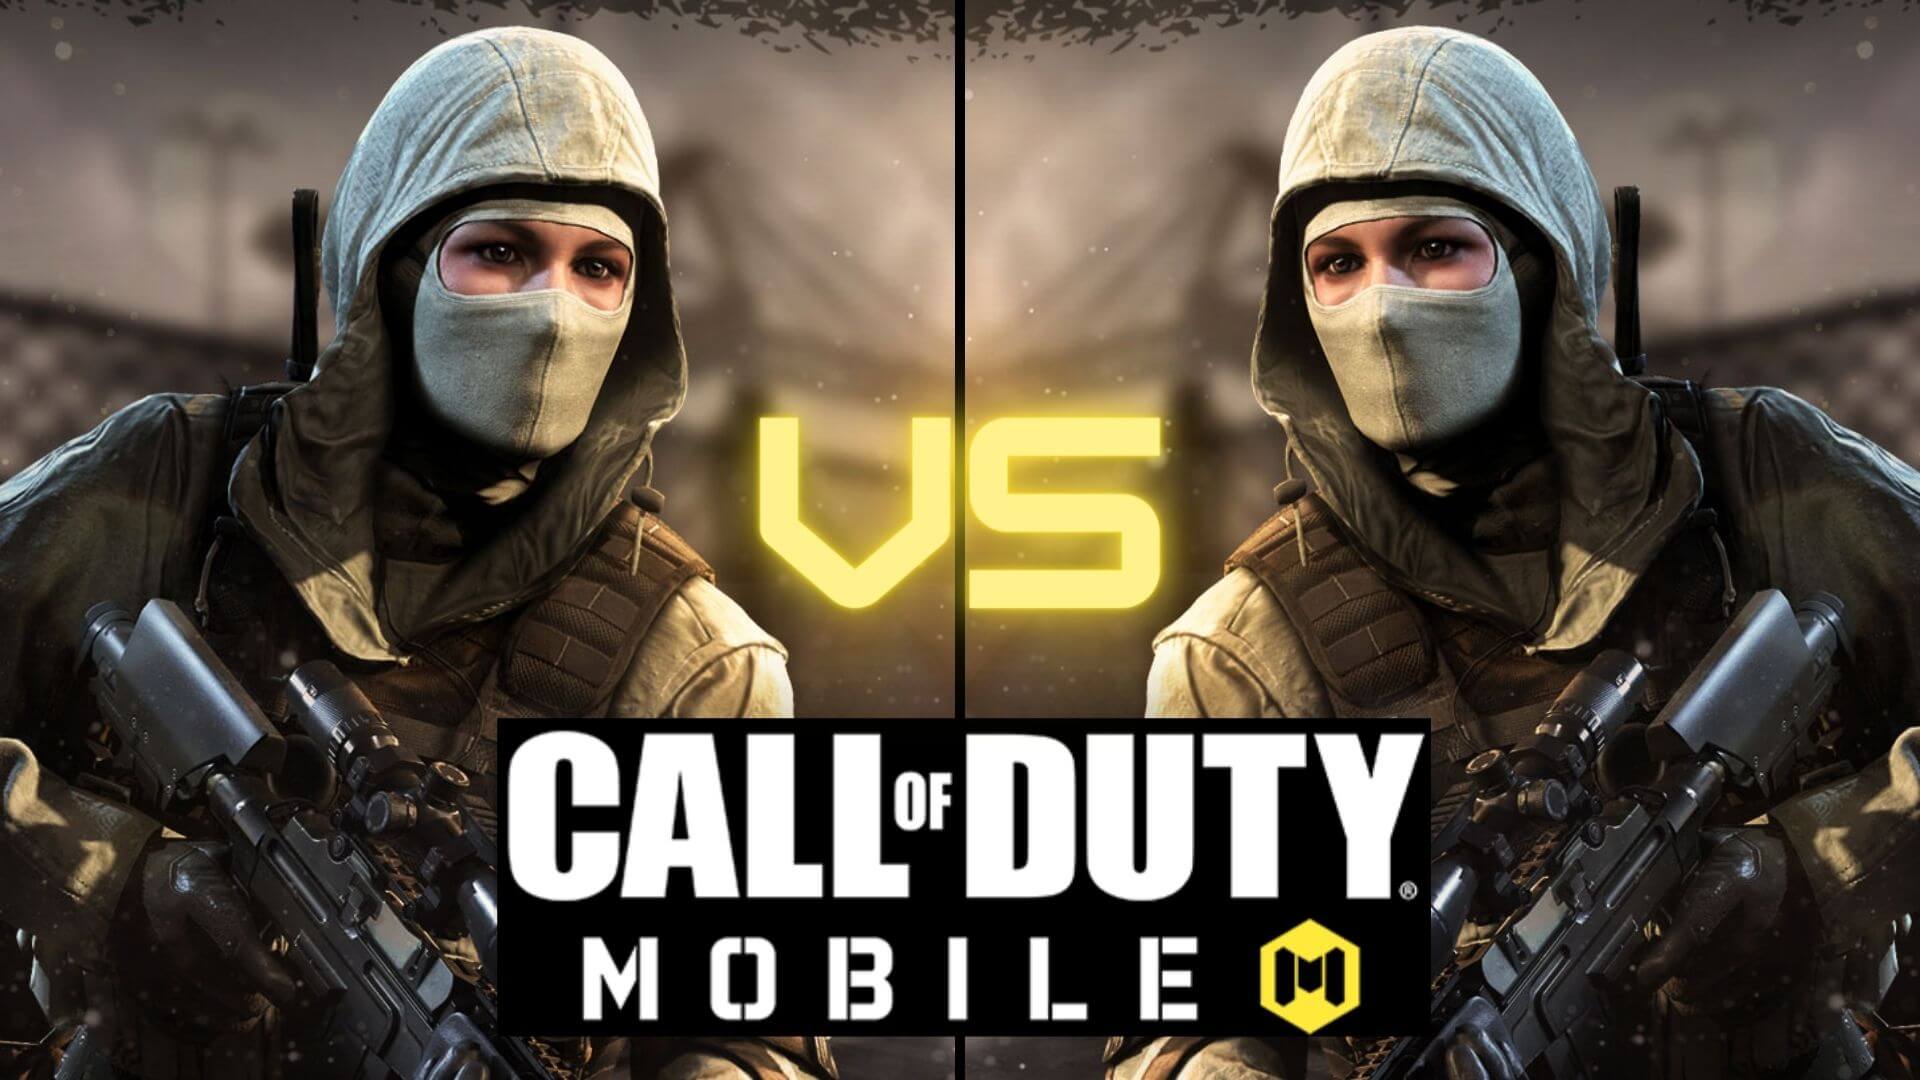 Will Warzone Mobile replace Call of Duty Mobile? - Charlie INTEL